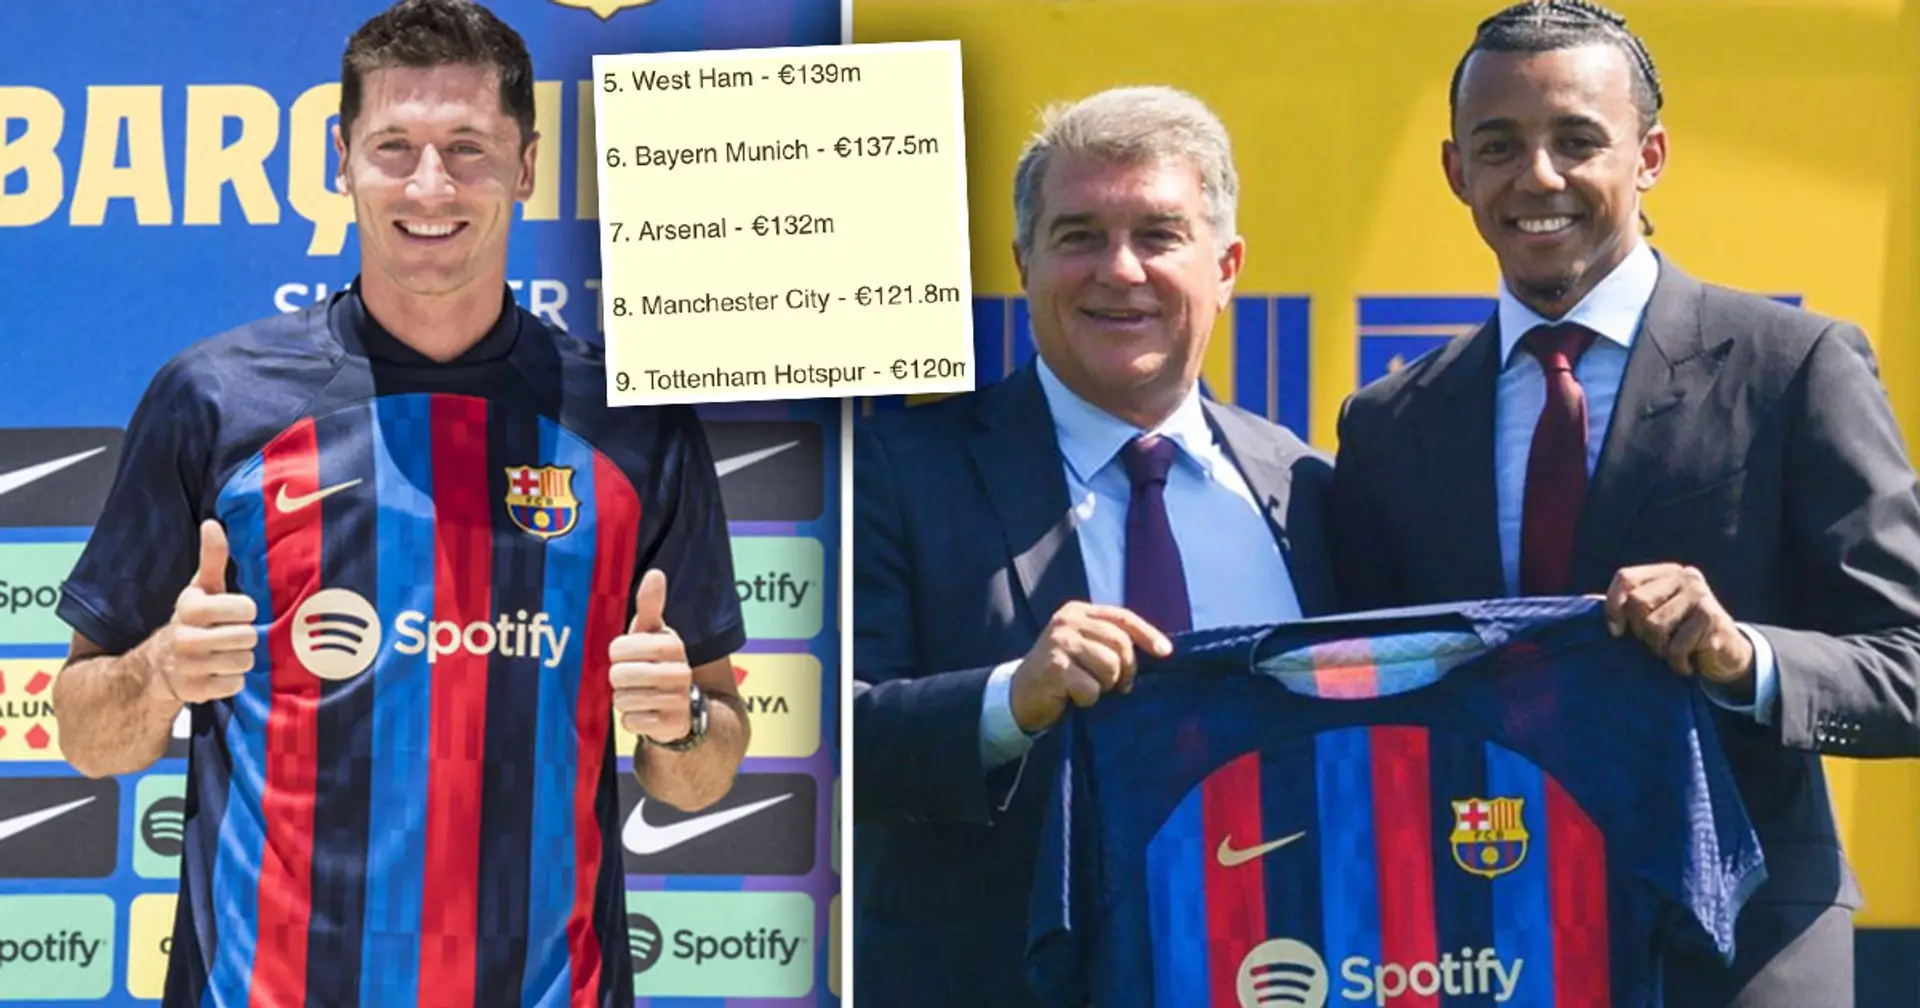 Most money spent on transfers this summer: Barca 2nd, one surprise team in top 3